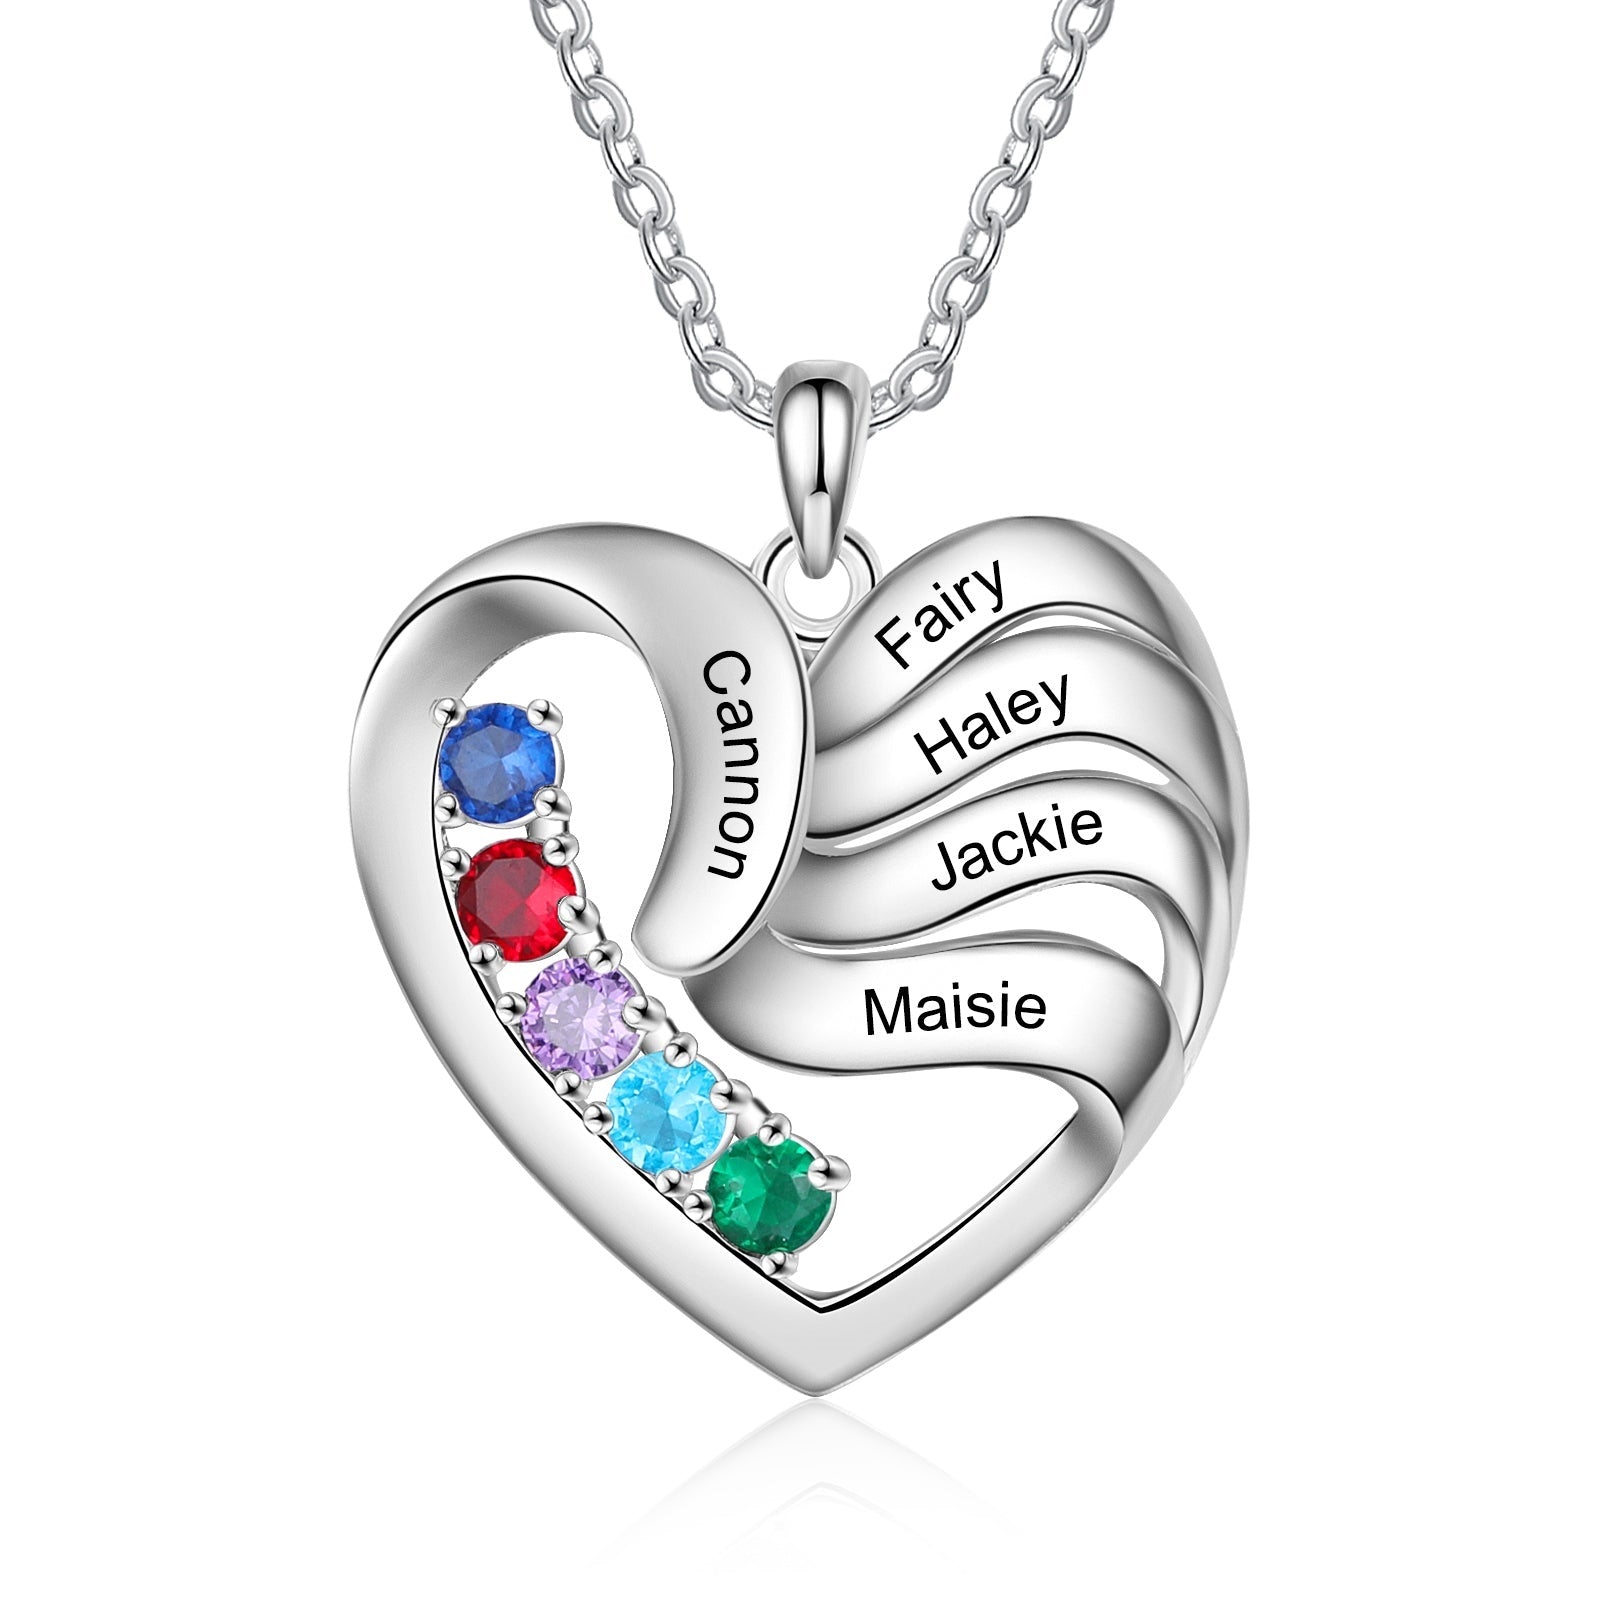 Personalized Heart Necklace with 2-5 Names Customized Birthstone Fashion Jewelry Memorial Gift